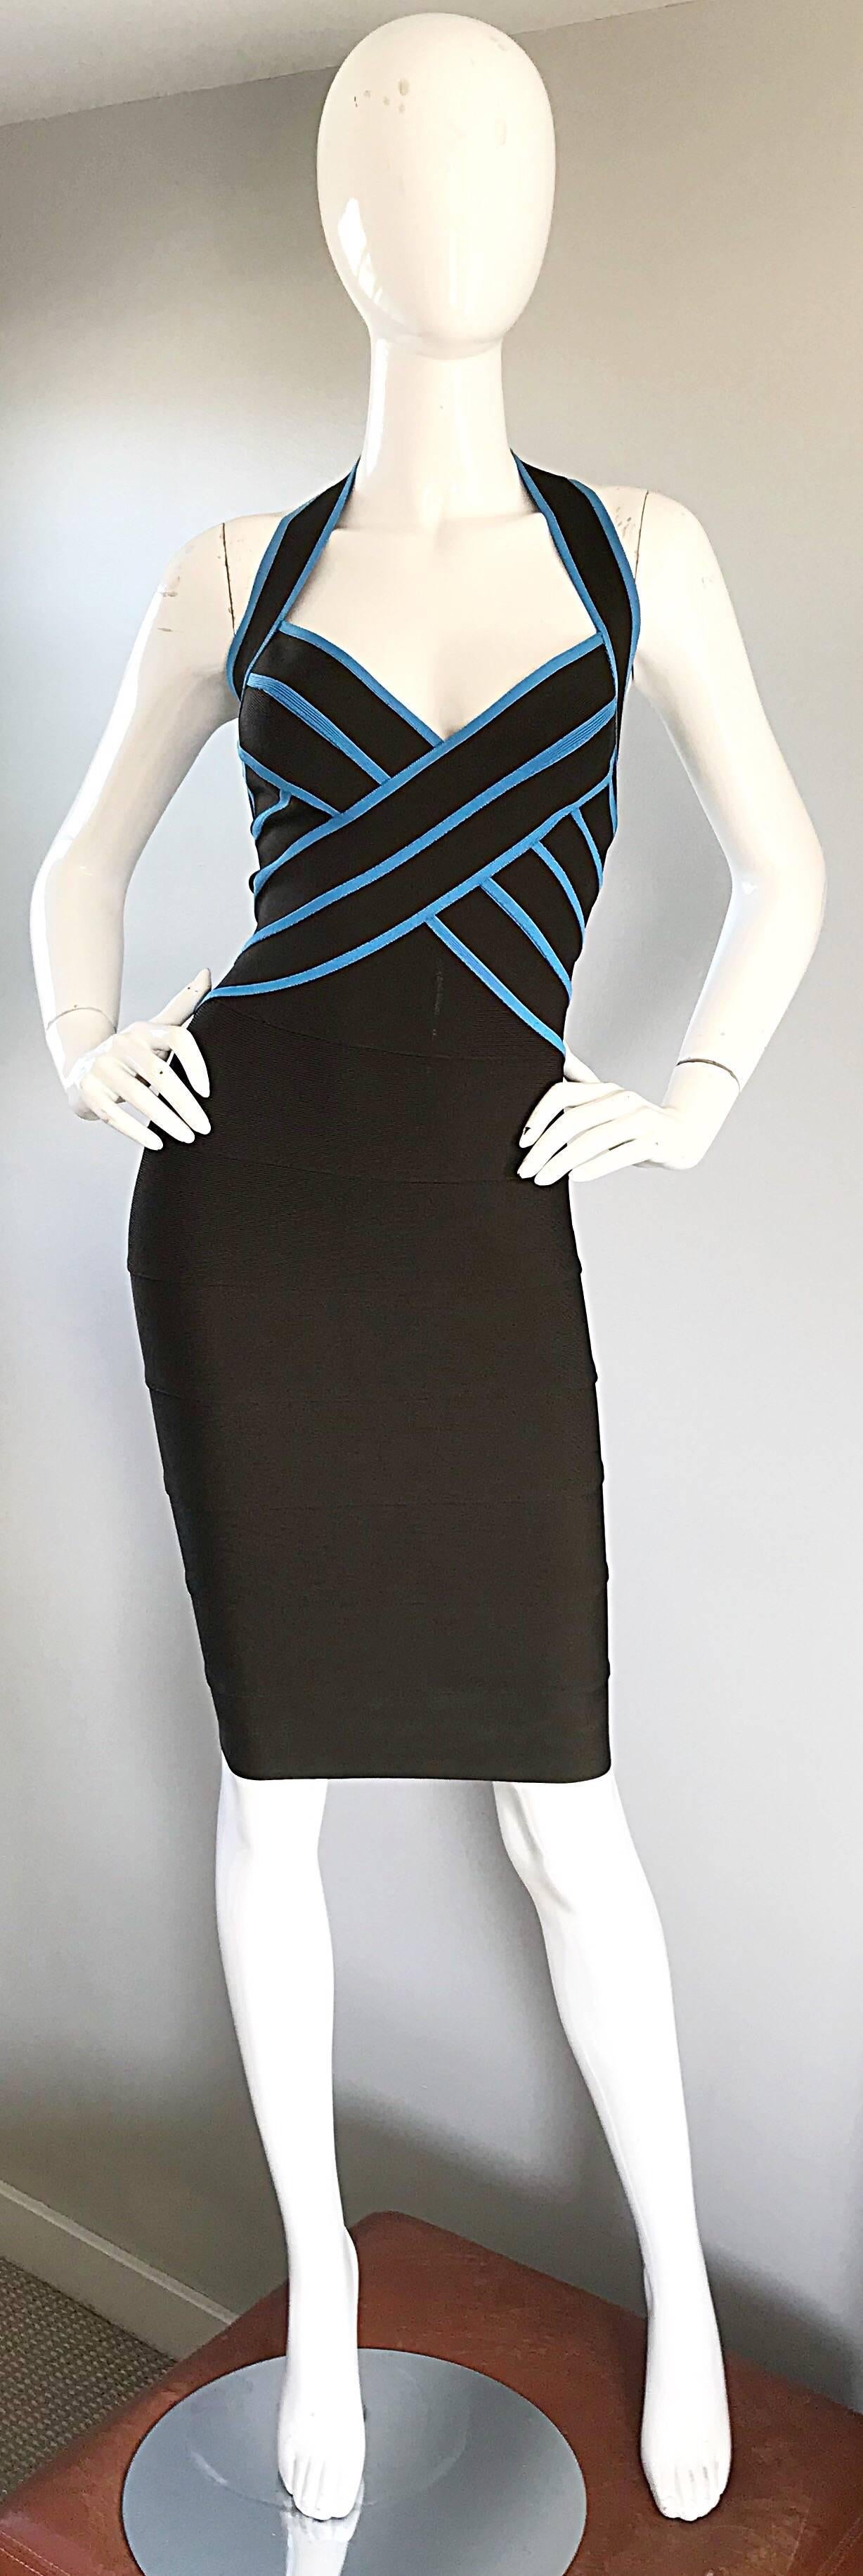 Rare and sexy 1990s HERVE LEGER COUTURE chocolate brown and blue bodcon halter bandage dress! Unlike Leger pieces today, this lovely gem was made in France, and was mostly sewn by hand. These signature bandage dresses do wonders for the body! The